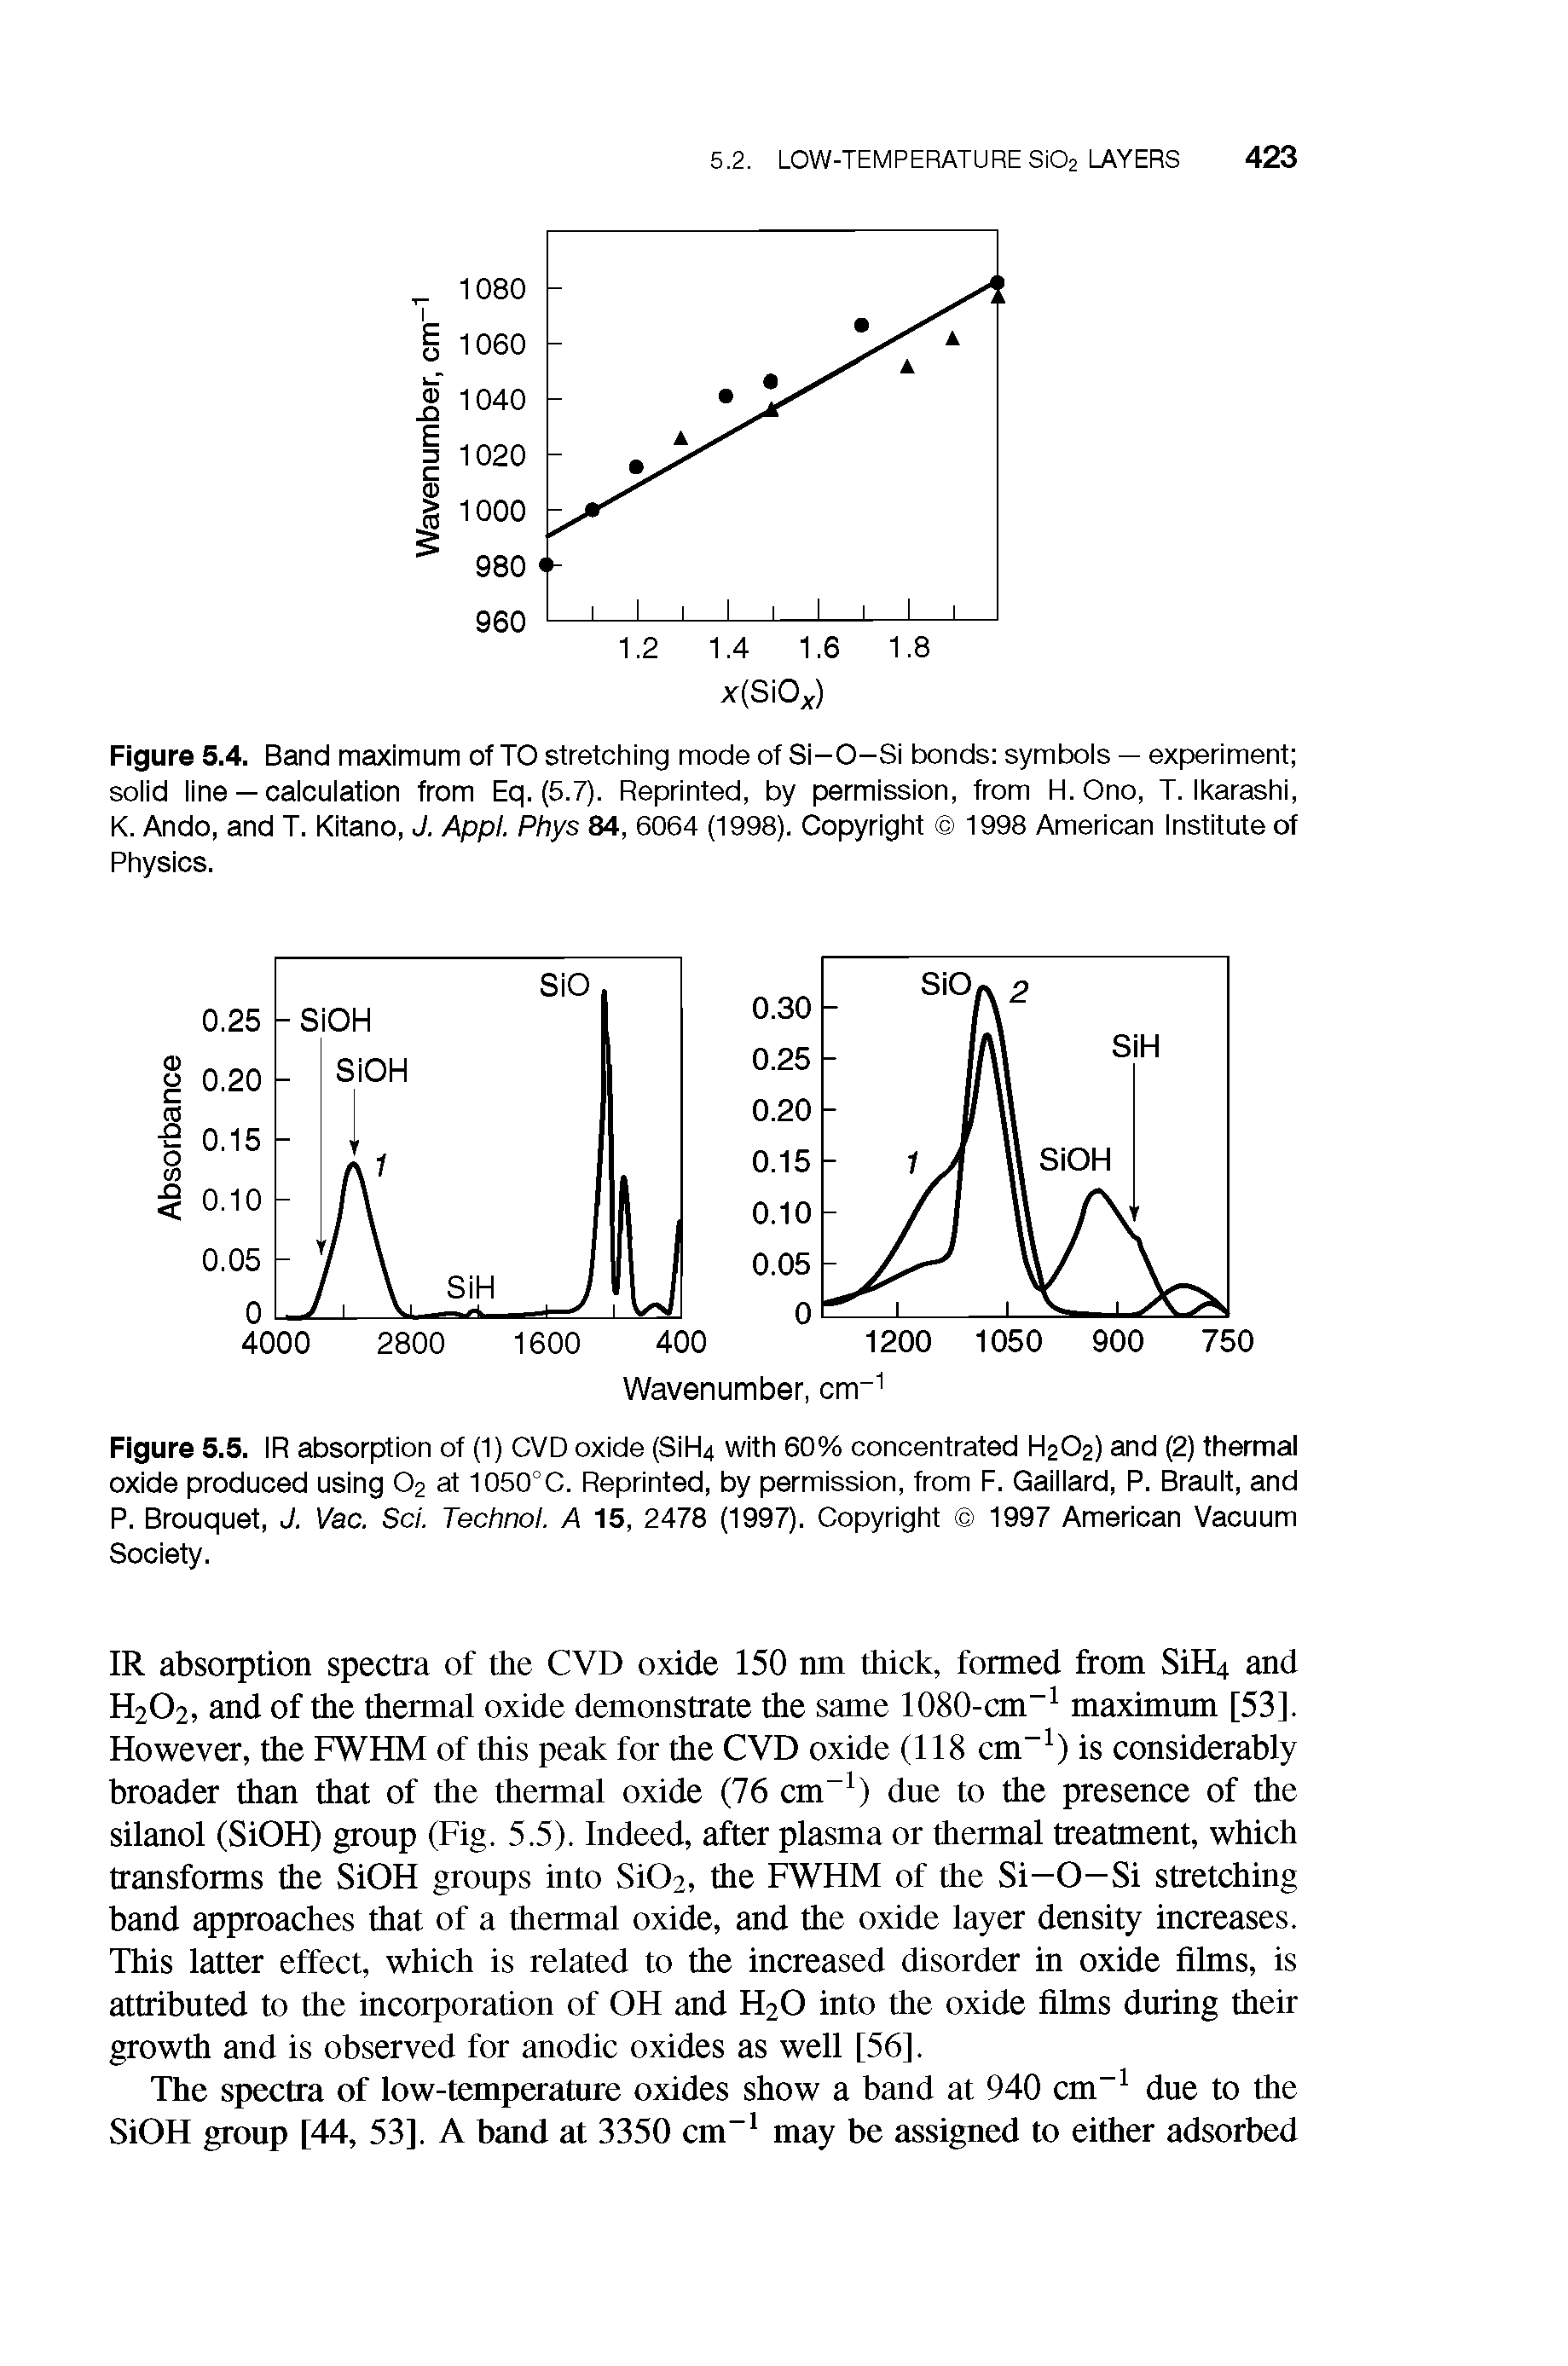 Figure 5.5. IR absorption of (1) CVD oxide (SiH4 with 60% concentrated H2O2) and (2) thermal oxide produced using O2 at 1050°C. Reprinted, by permission, from F. Gaillard, P. Brault, and P. Brouquet, J, Vac. Sc/. Techno . A 15, 2478 (1997). Copyright 1997 American Vacuum Society.